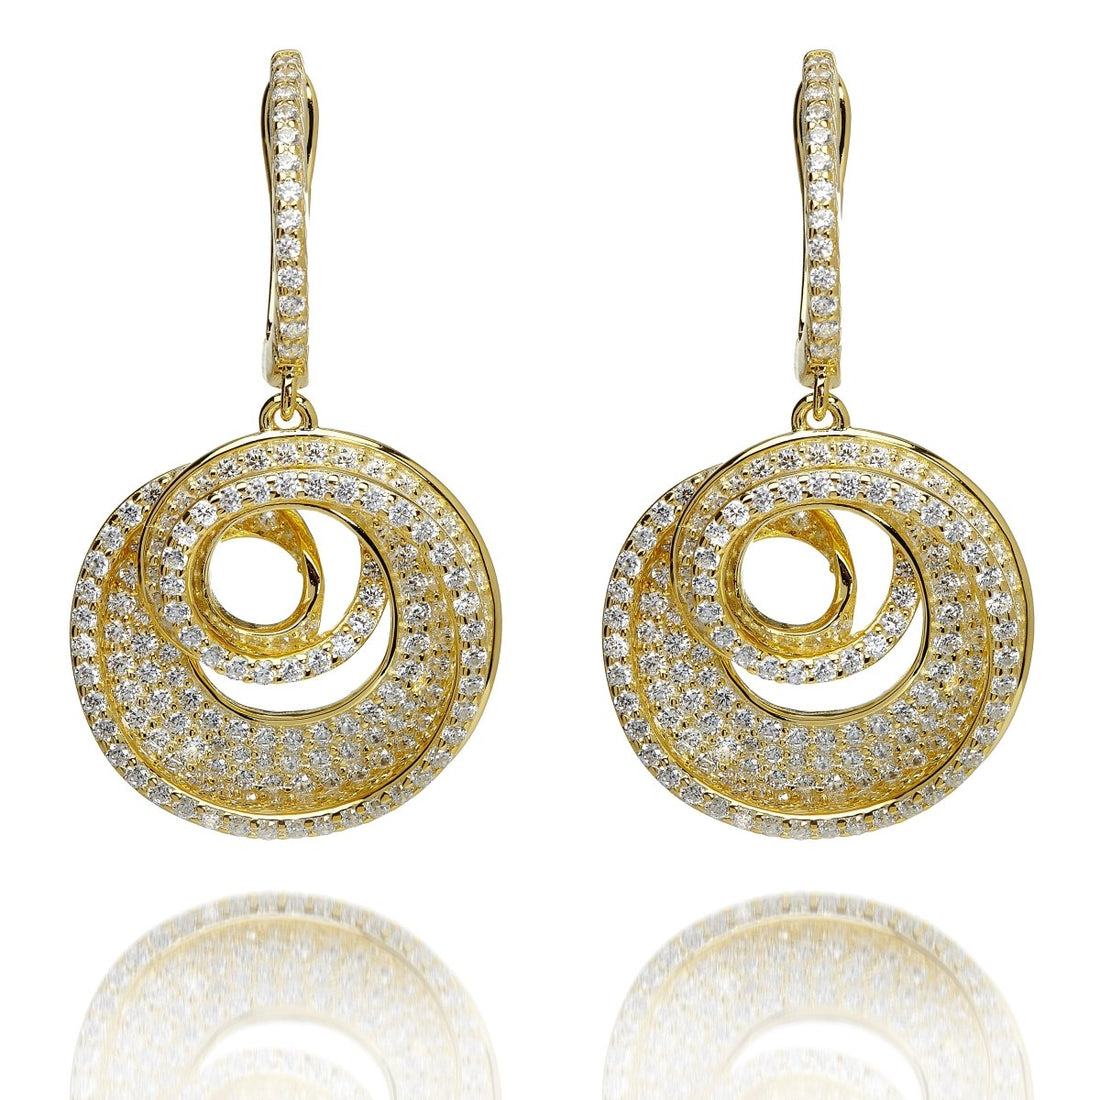 5.75ct Cubic Zirconia Spiral Drop Earrings in 14k Yellow Gold Plated Sliver